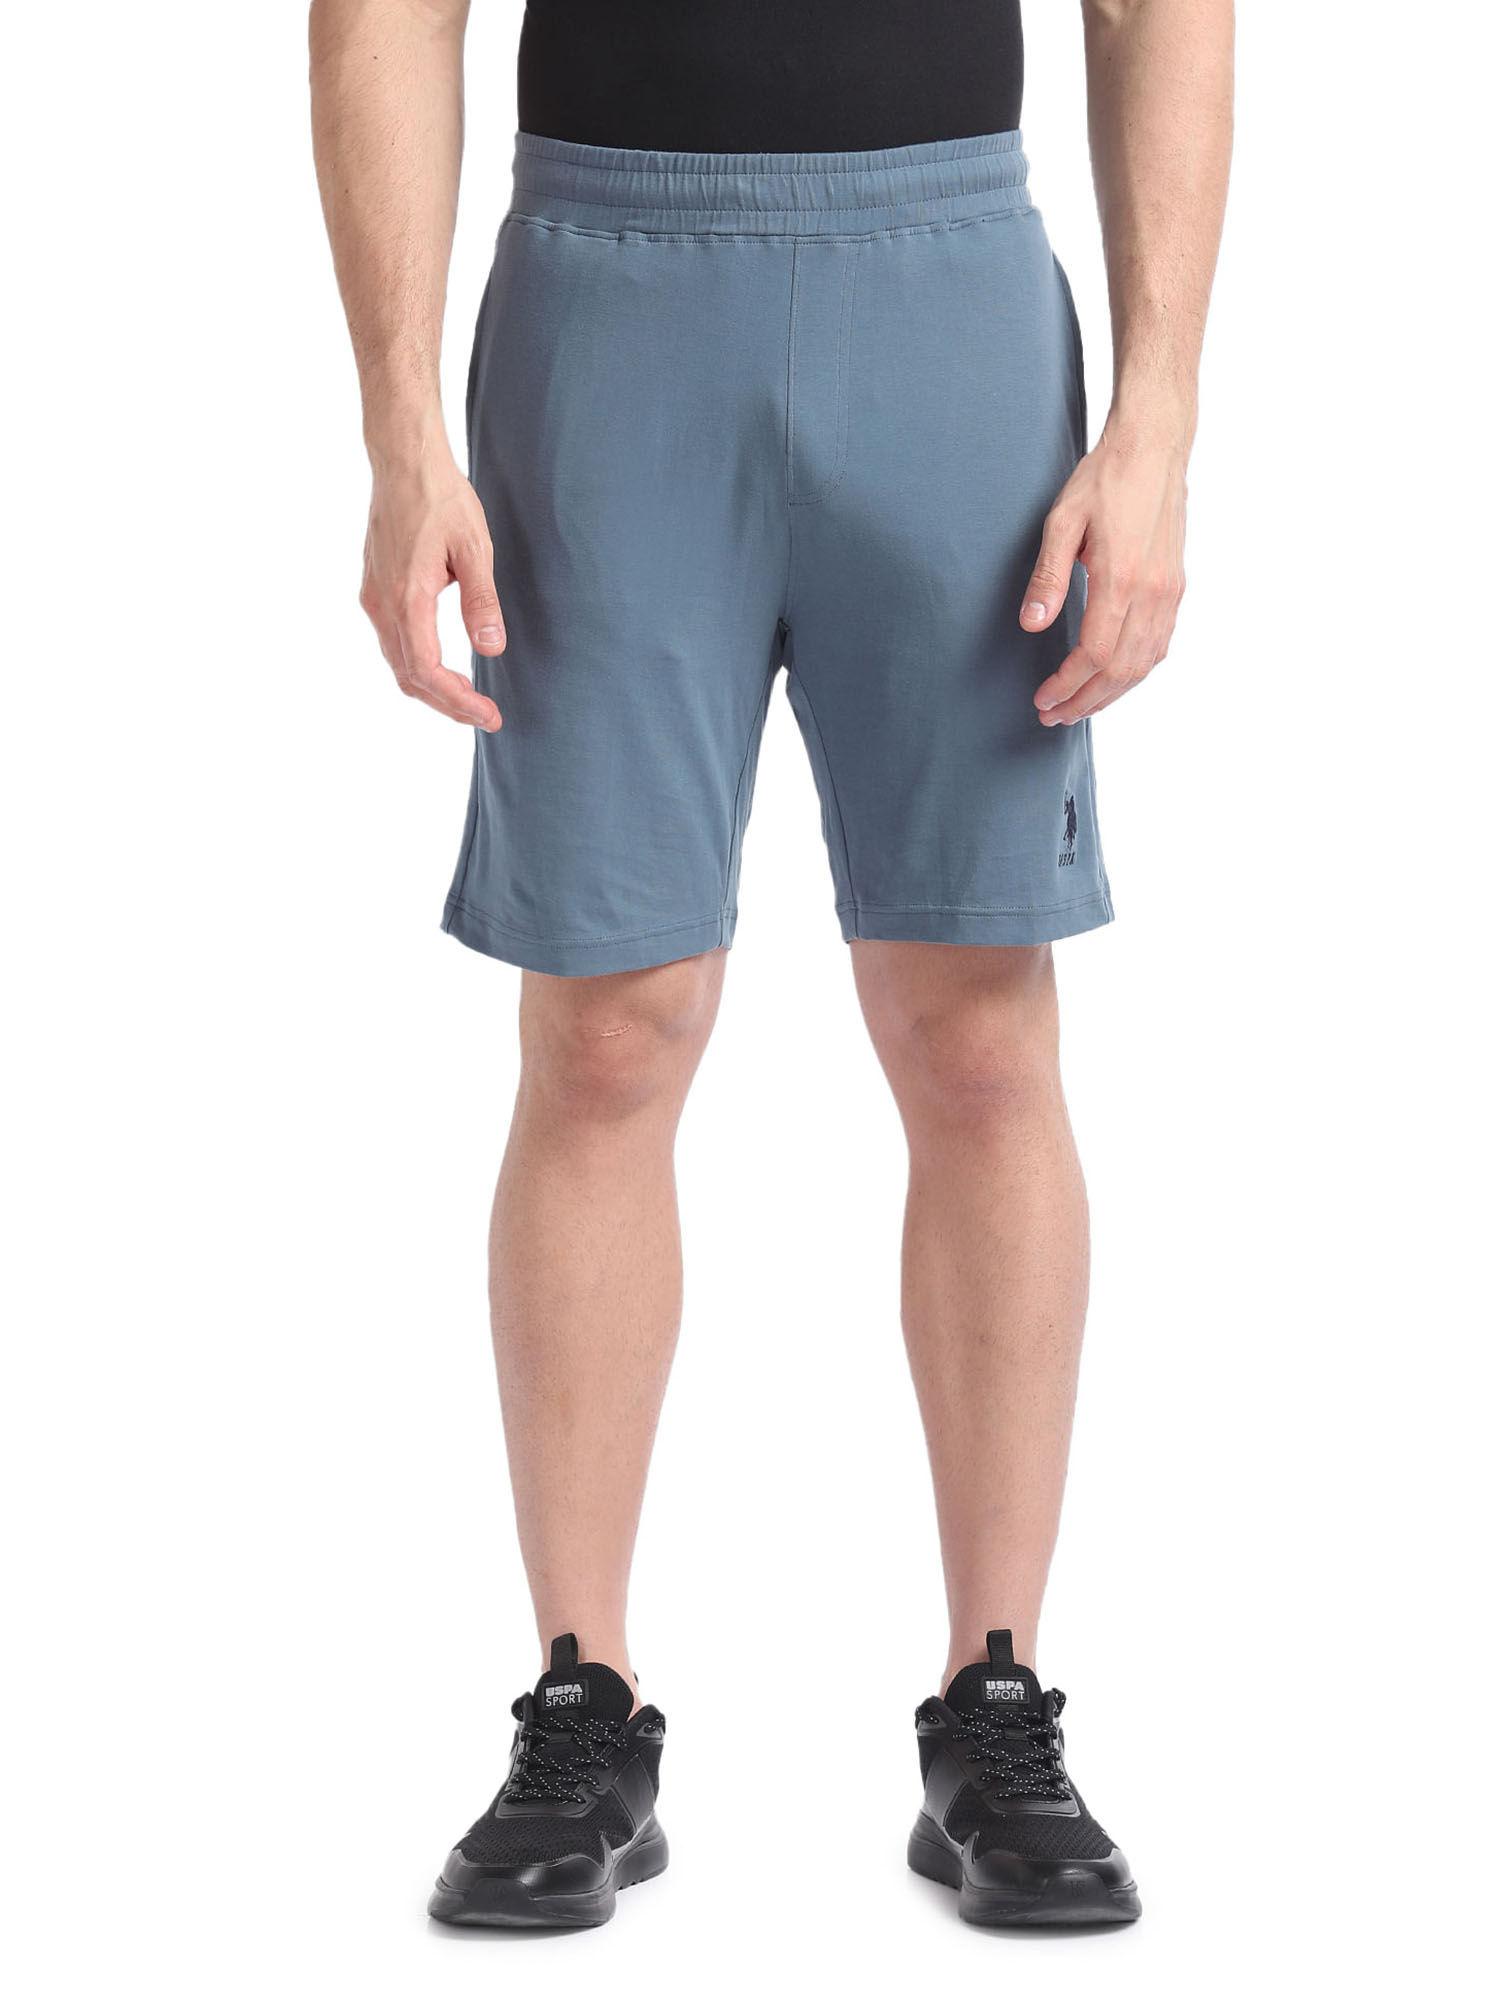 cotton stretch oes01 lounge shorts